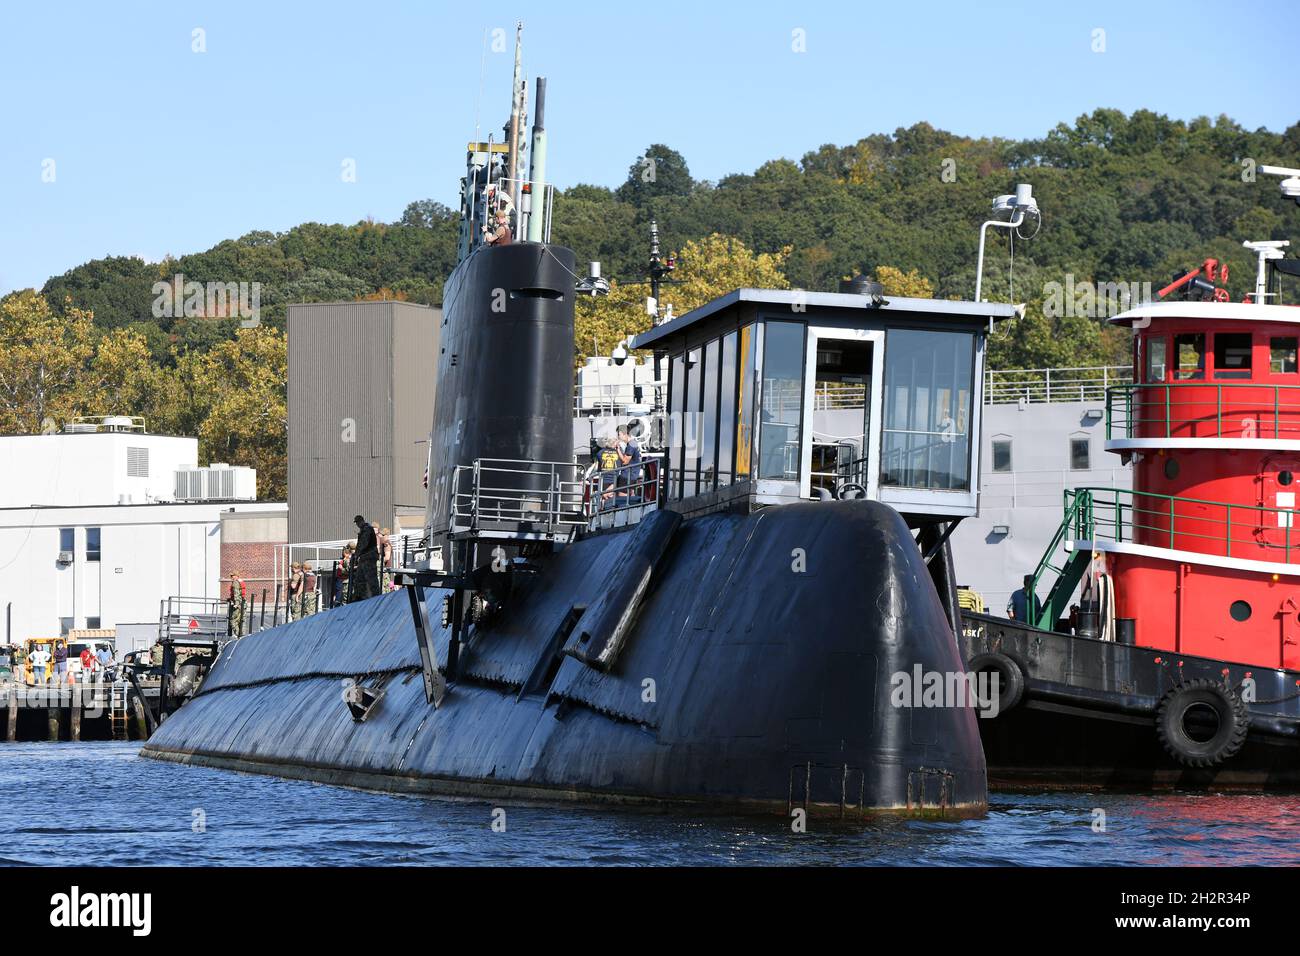 Groton, United States. 15 October, 2021. The U.S. Navy Historic Ship USS Nautilus, is moved from pier side in preparation to be towed up river at Submarine Base New London October 15, 2021 in Groton, Connecticut. Nautilus, was the first nuclear-powered submarine and current Submarine Force Museum centerpiece, and will begin an $36-million dollar preservation project. Credit: CPO Joshua Karsten/U.S. Navy/Alamy Live News Stock Photo